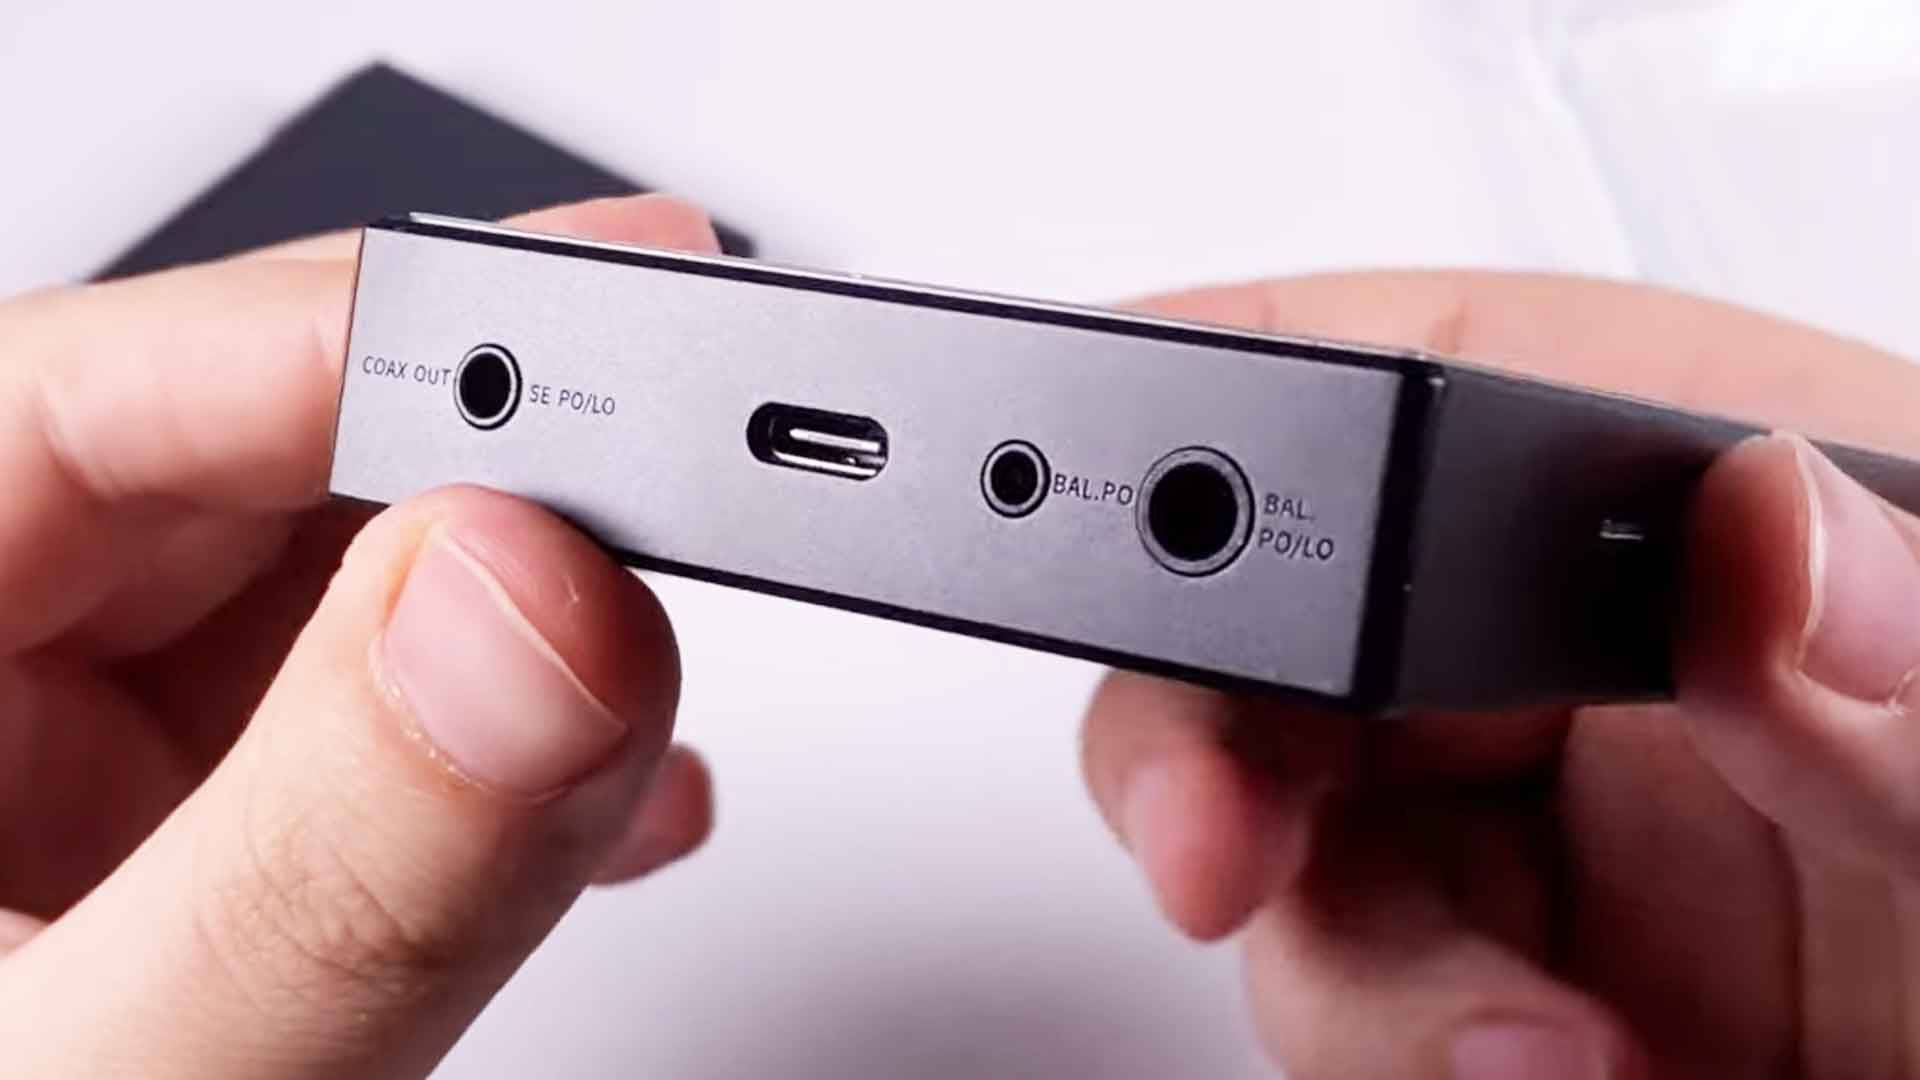 FiiO M11S, FiiO M11S review, FiiO M11S price, FiiO M11S specs, music player, High fidelity, mp3 music player, mp3 player, best mp3 player, mp3 player Bluetooth, DAC music player